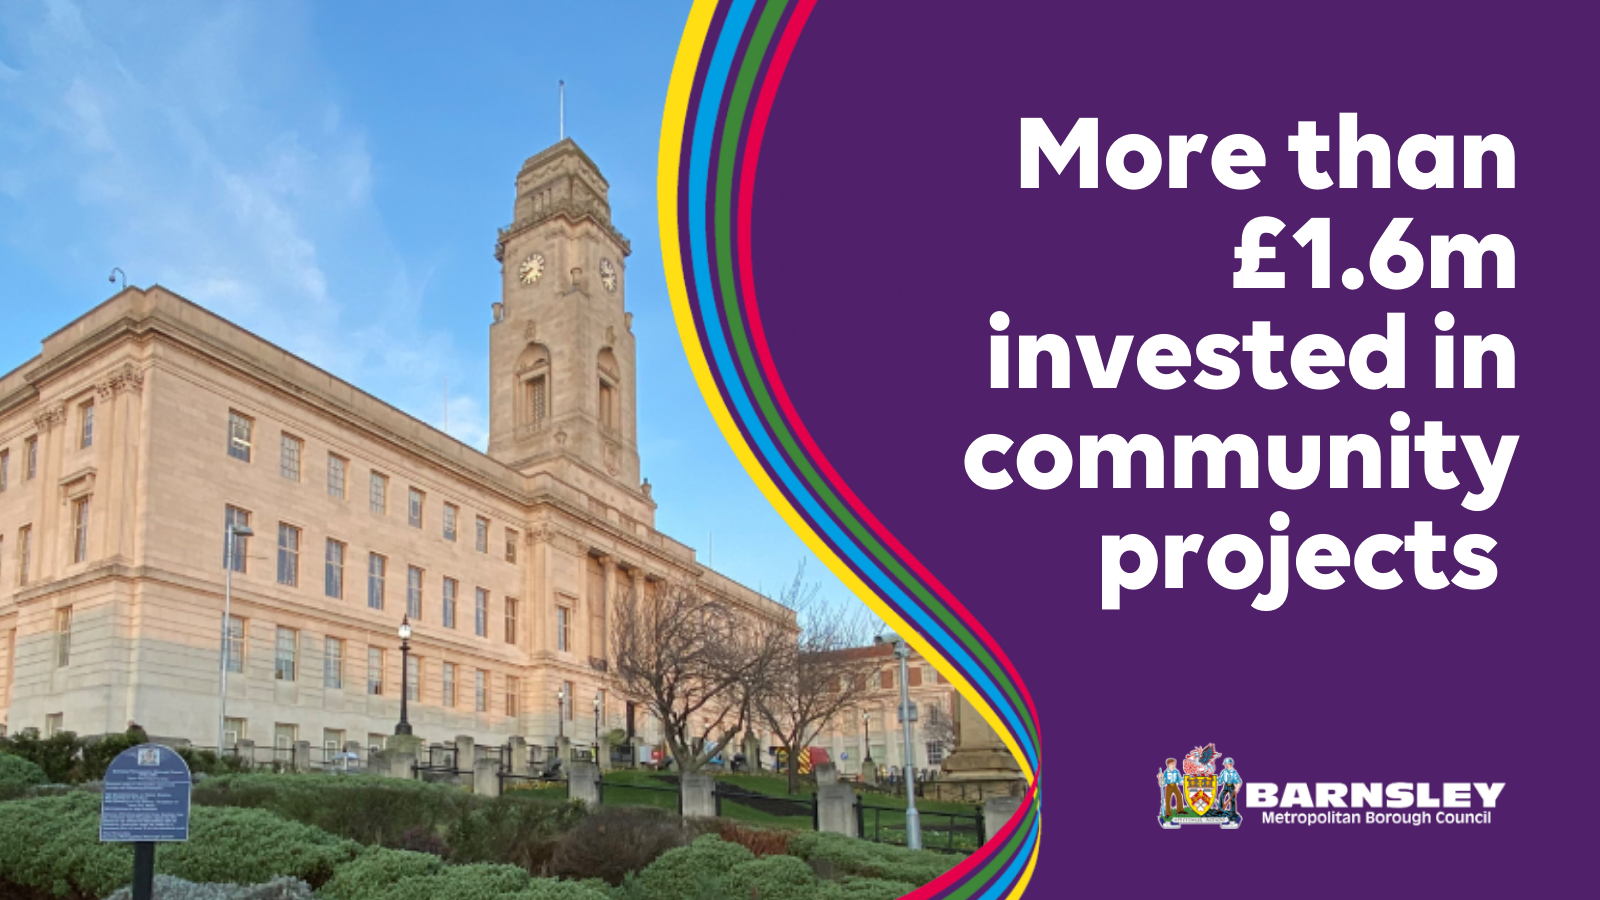 More than £1.6m invested in community projects